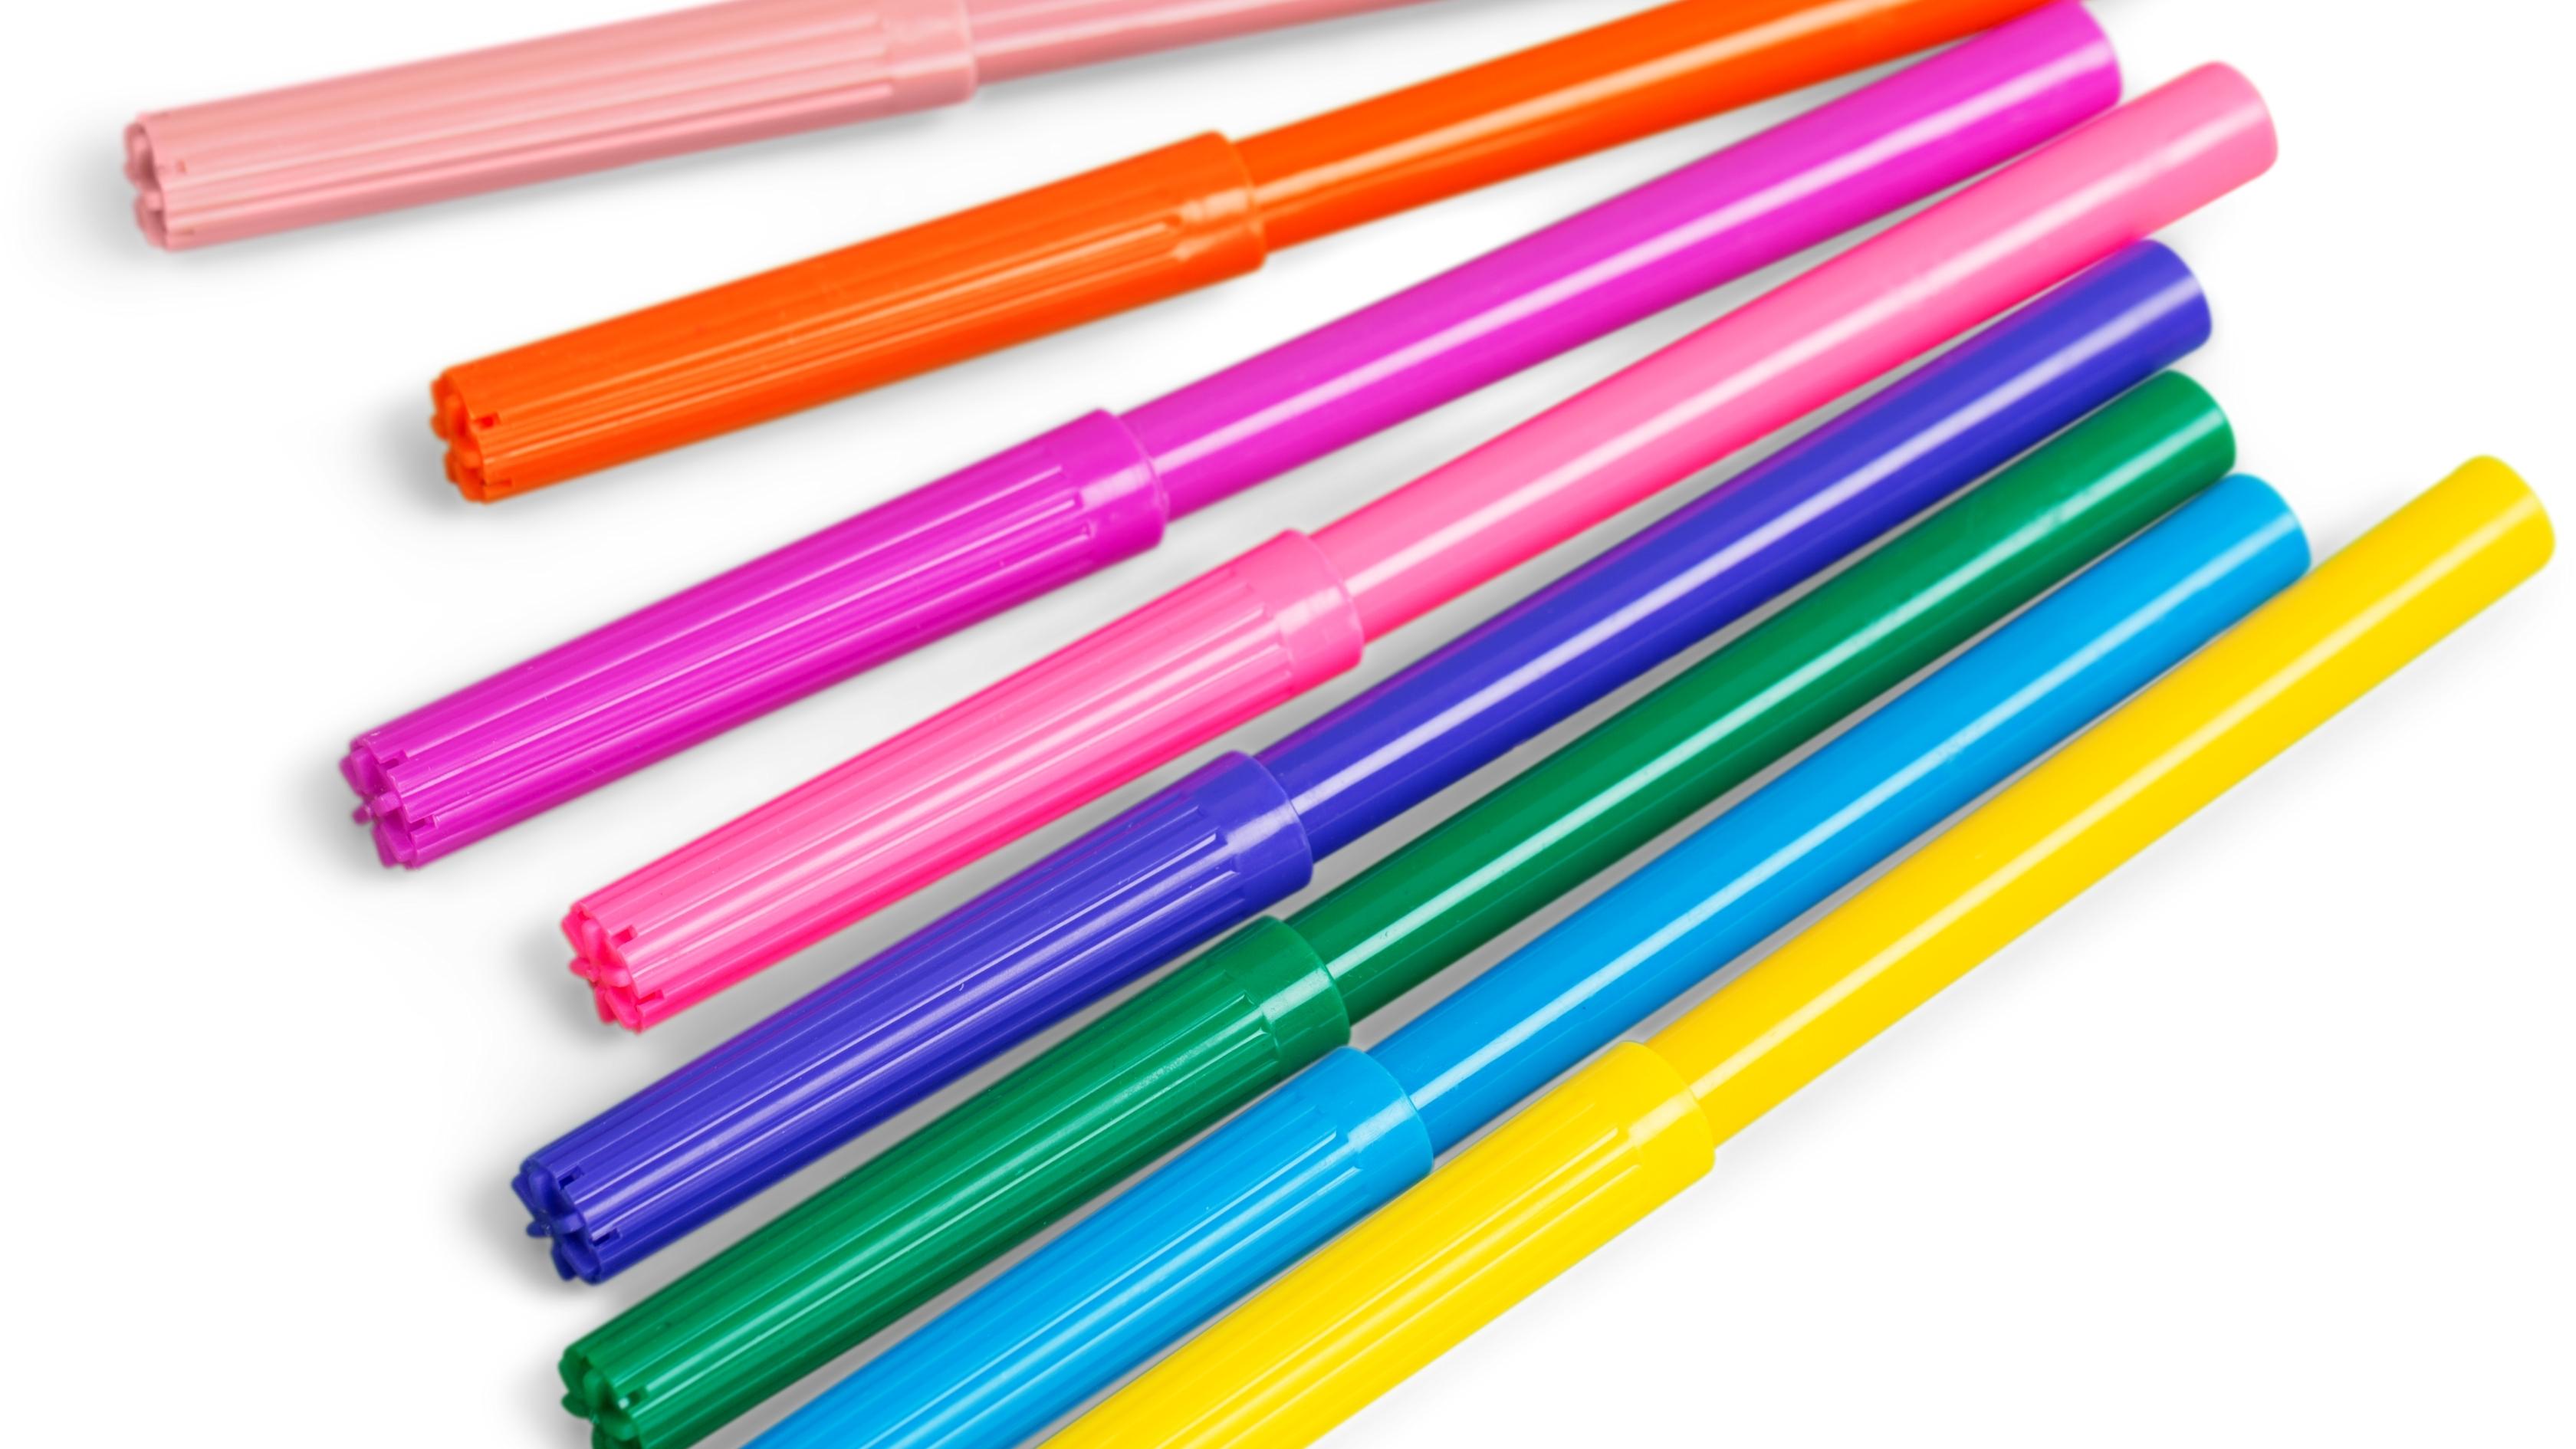 Pens for the Pinwheel healthy kid phone activity that's fun and relaxing. No screens. 